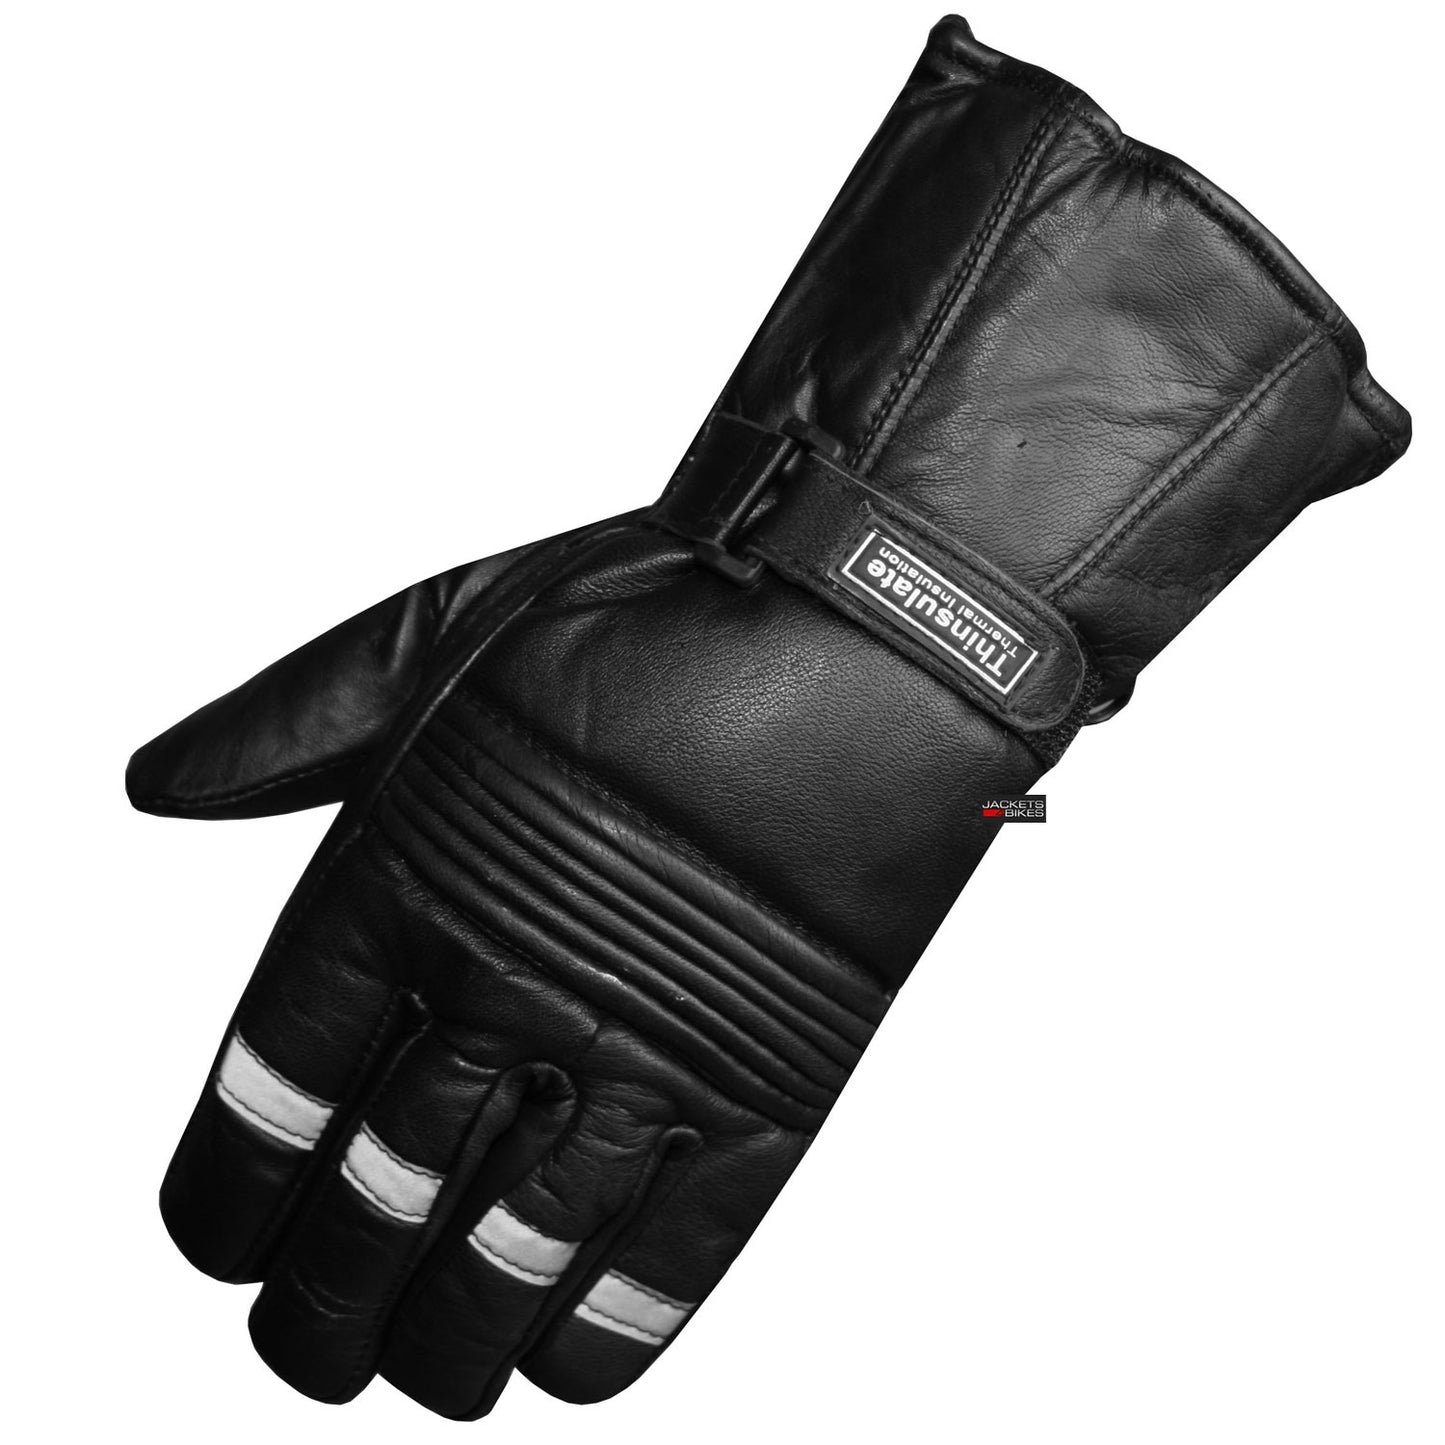 New Reflective Motorcycle Biker Riding Winter Sheep Leather Gloves Black